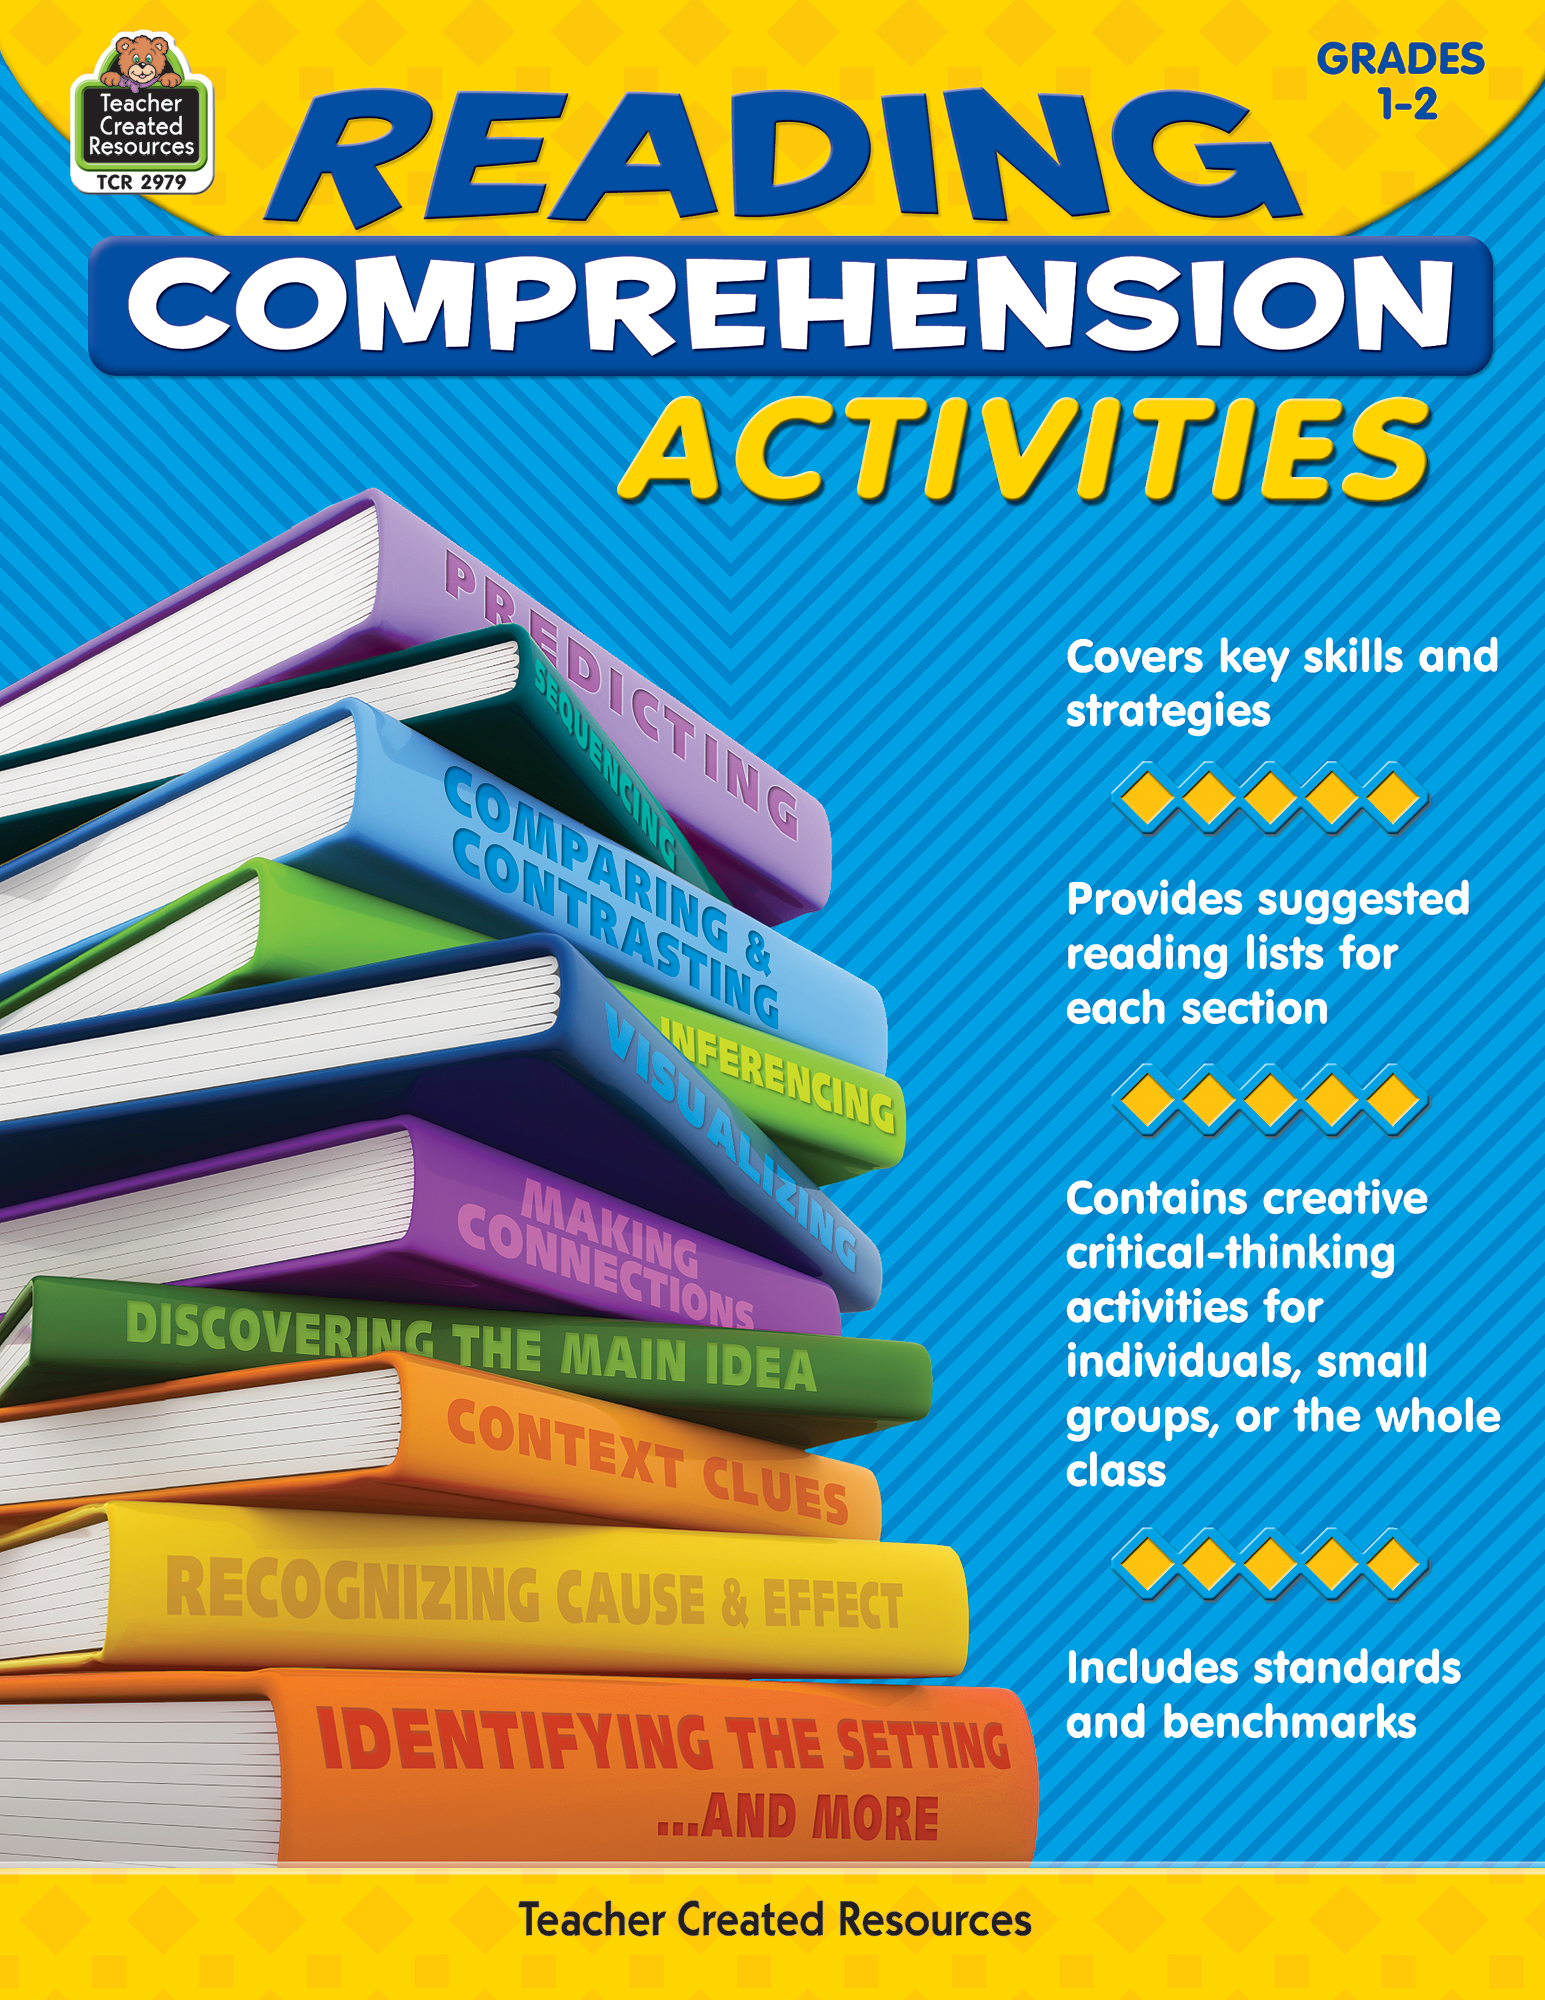 Reading Comprehension Activities Grade 1-2 - TCR2979 ...